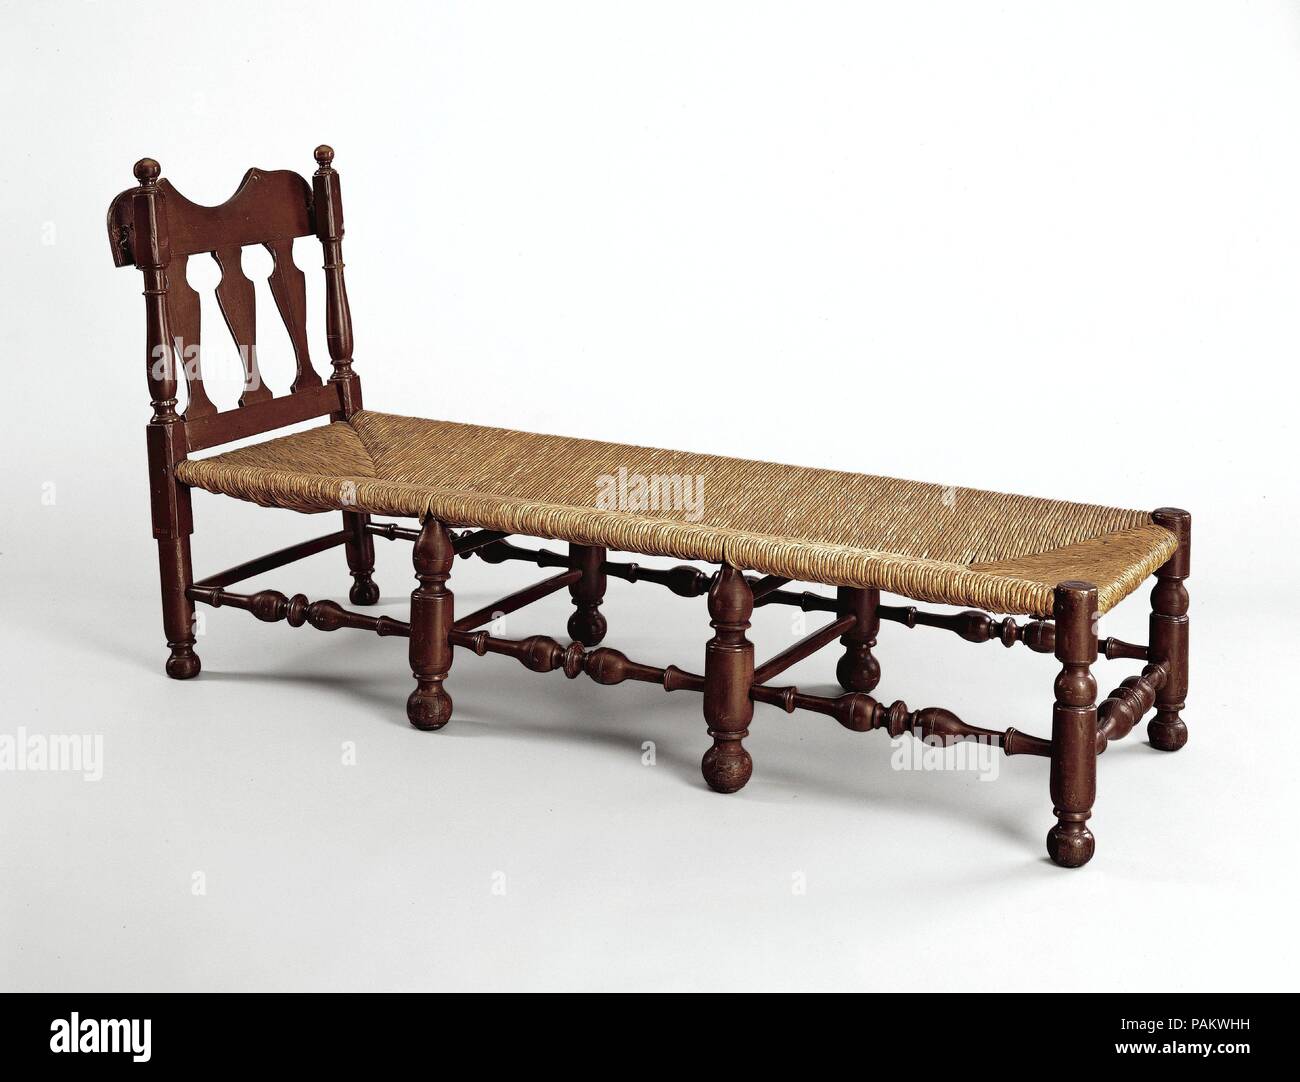 Daybed. Culture: American. Dimensions: 36 x 67 3/4 x 23 1/4 in. (91.4 x 172.1 x 59.1 cm). Date: 1725-50. Museum: Metropolitan Museum of Art, New York, USA. Stock Photo